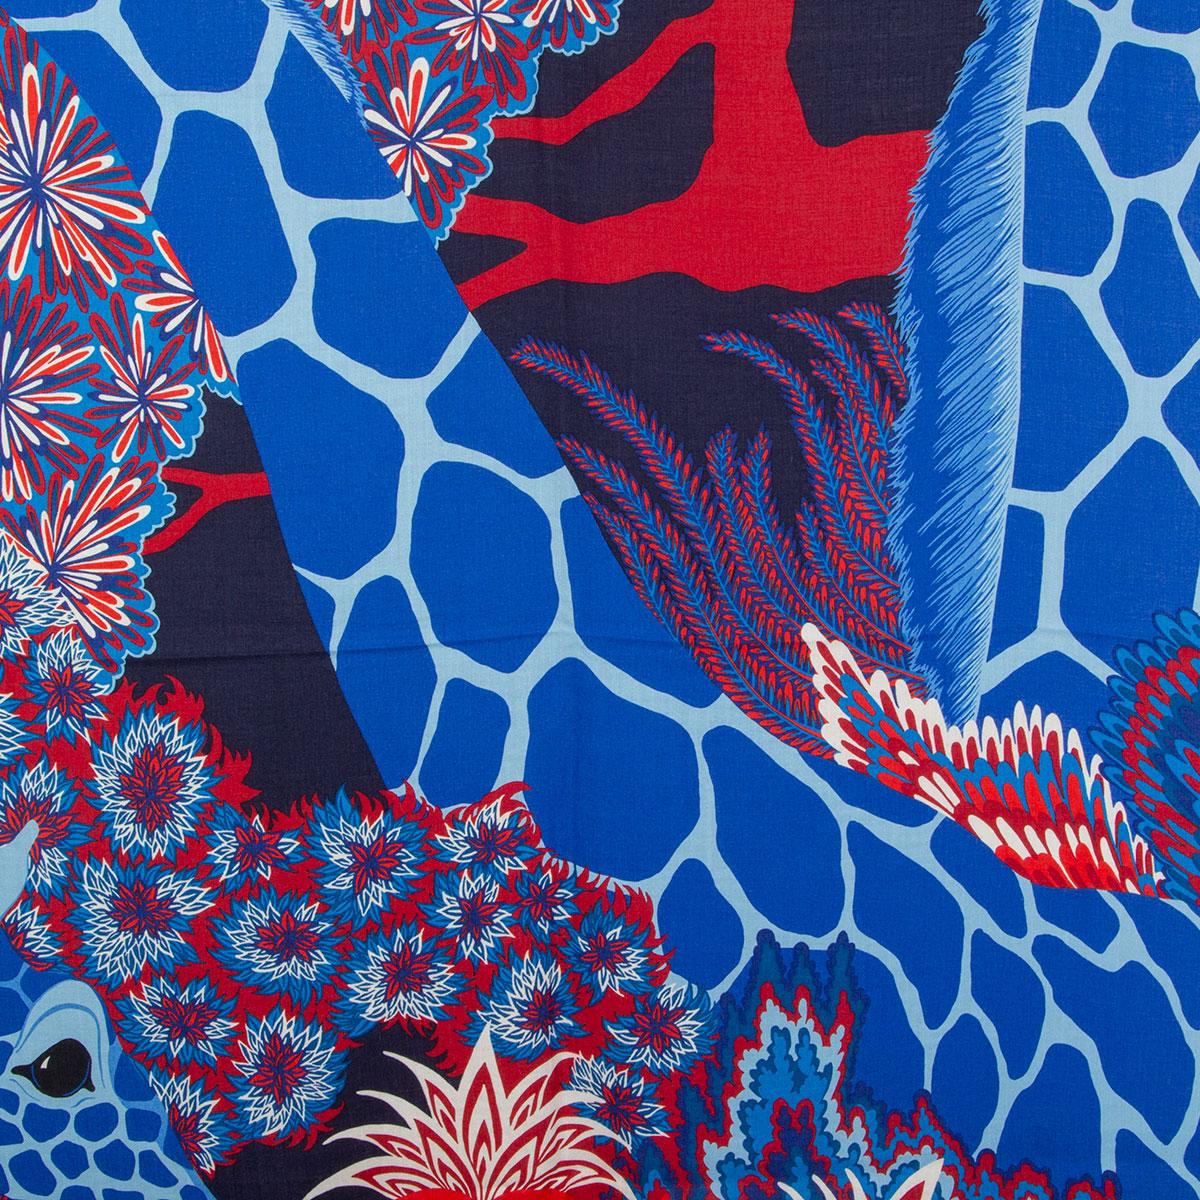 Hermes 'The Three Graces 140' shawl by Alice Shirley in midnight blue cashmere (70%) and silk (30%) with contrasting red hem and detail in blue, red and white. Has been worn and is in excellent condition.

Width 140cm (55in)
Height 140cm (55in)